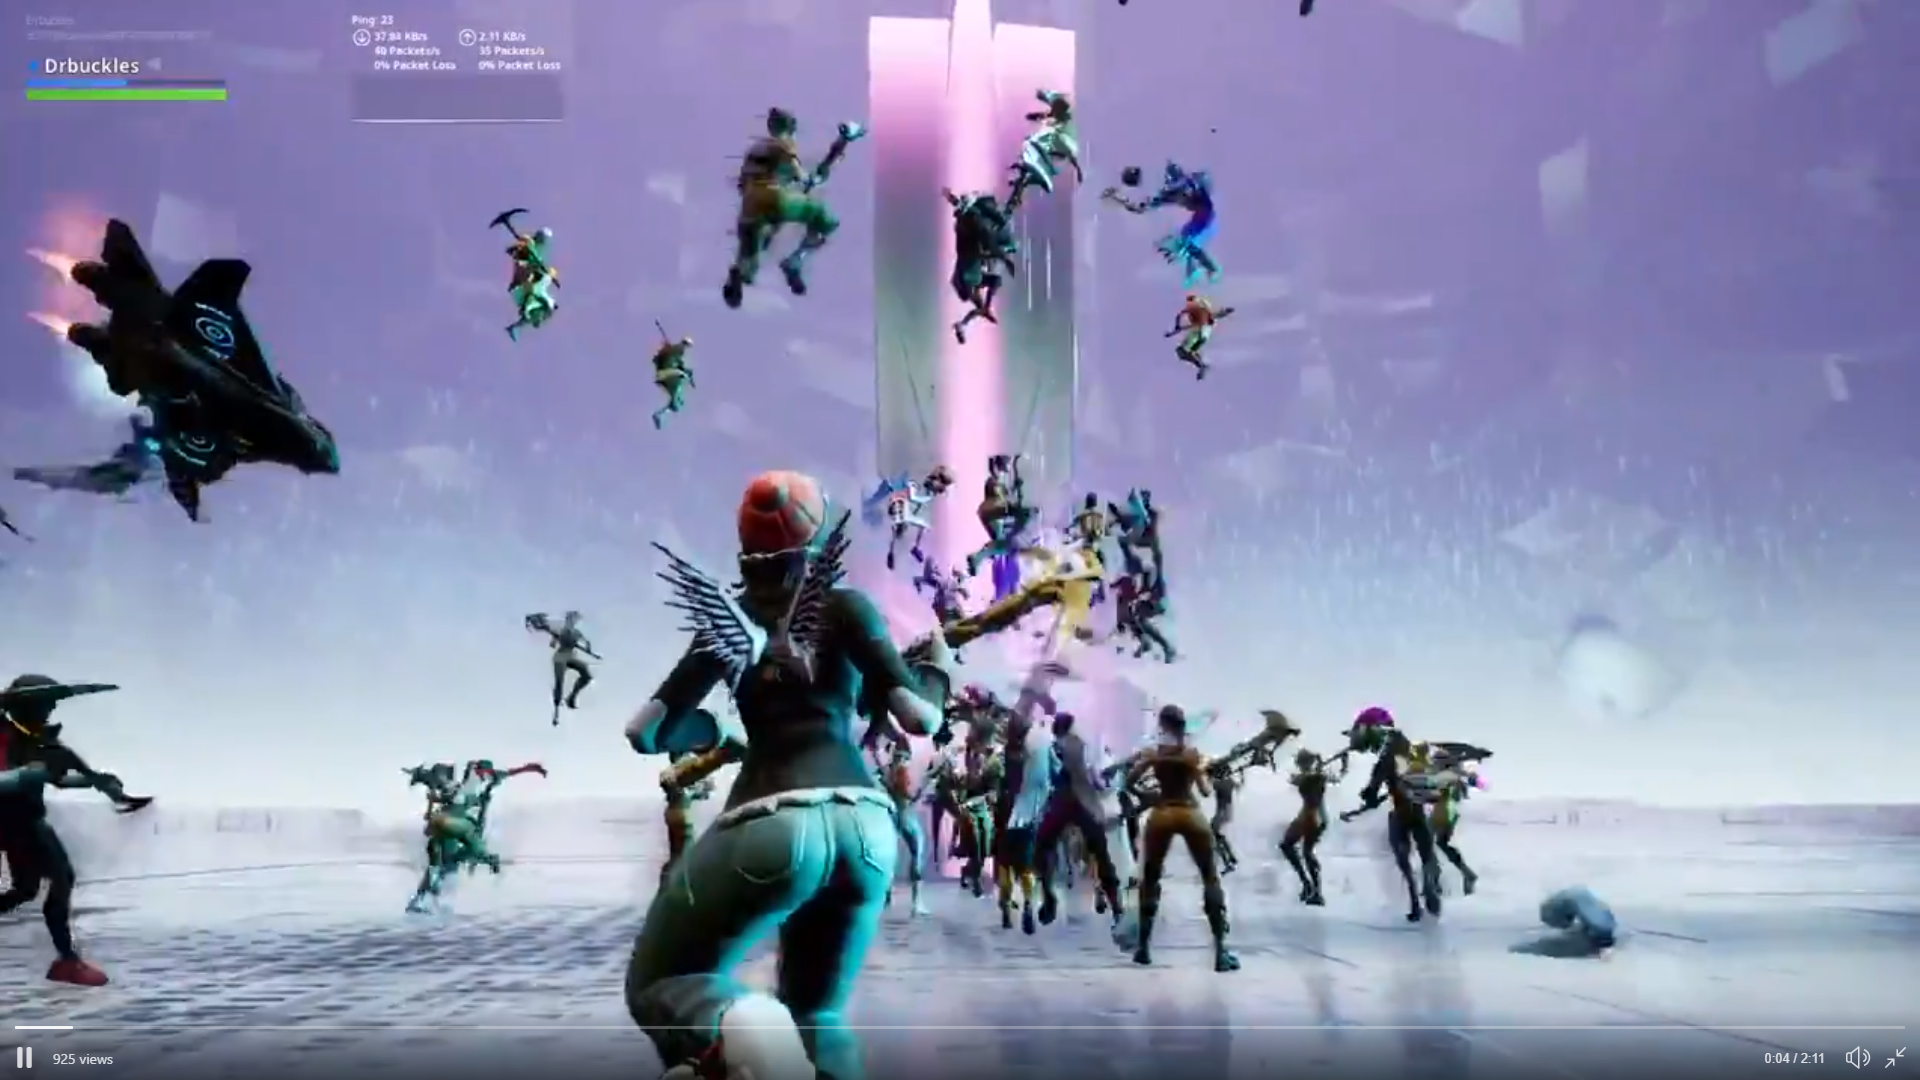 Fortnite Season Teaser Image Tease That Neo Tilted Towers May